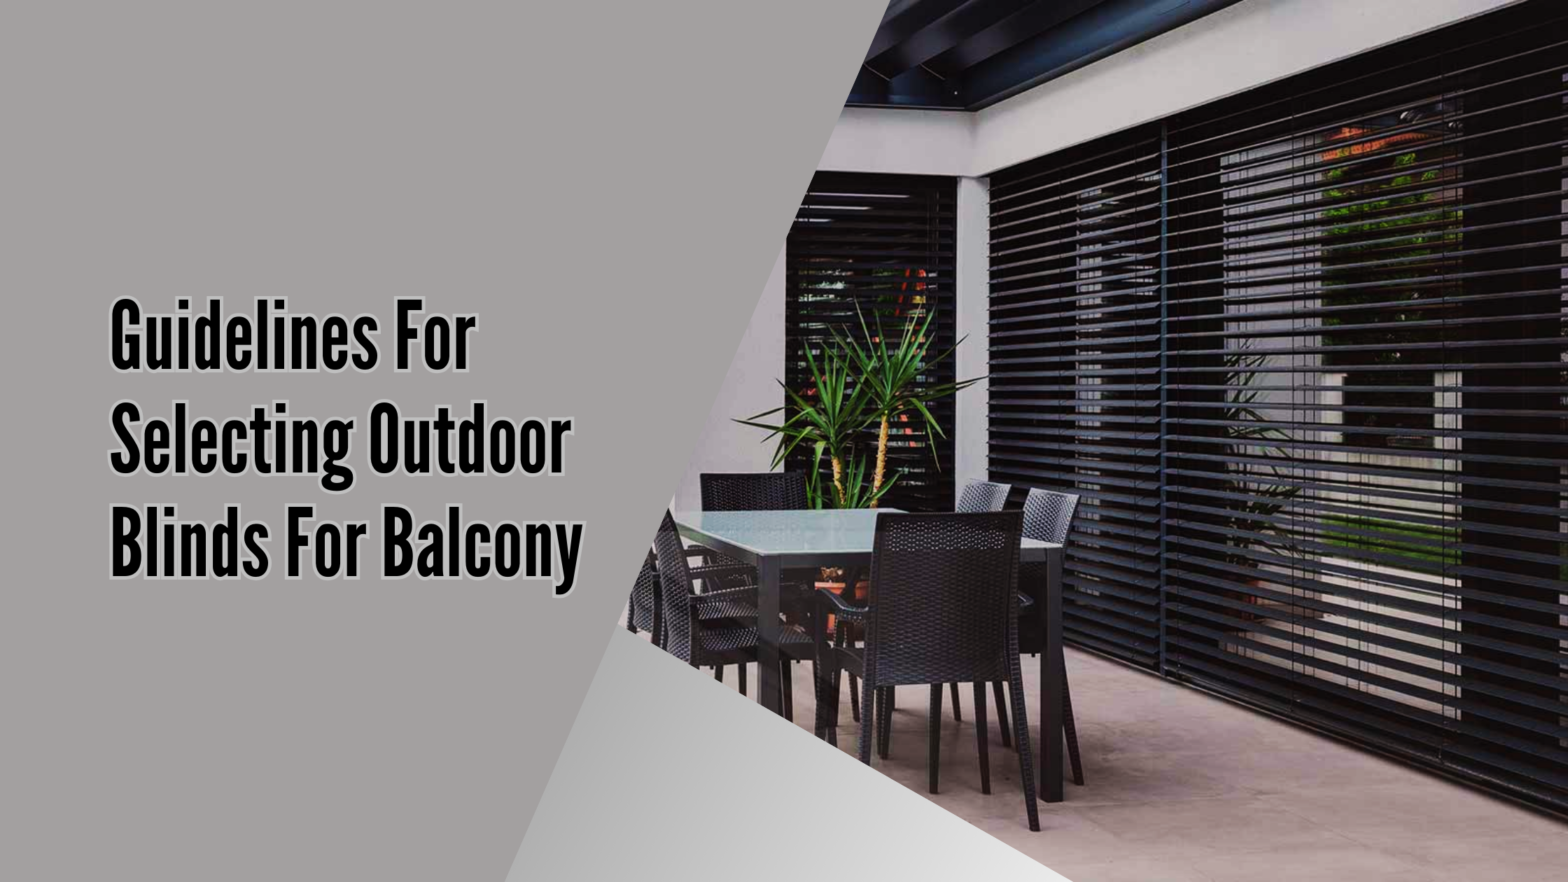 Quick Tips On Choosing Outdoor Blinds For Balcony